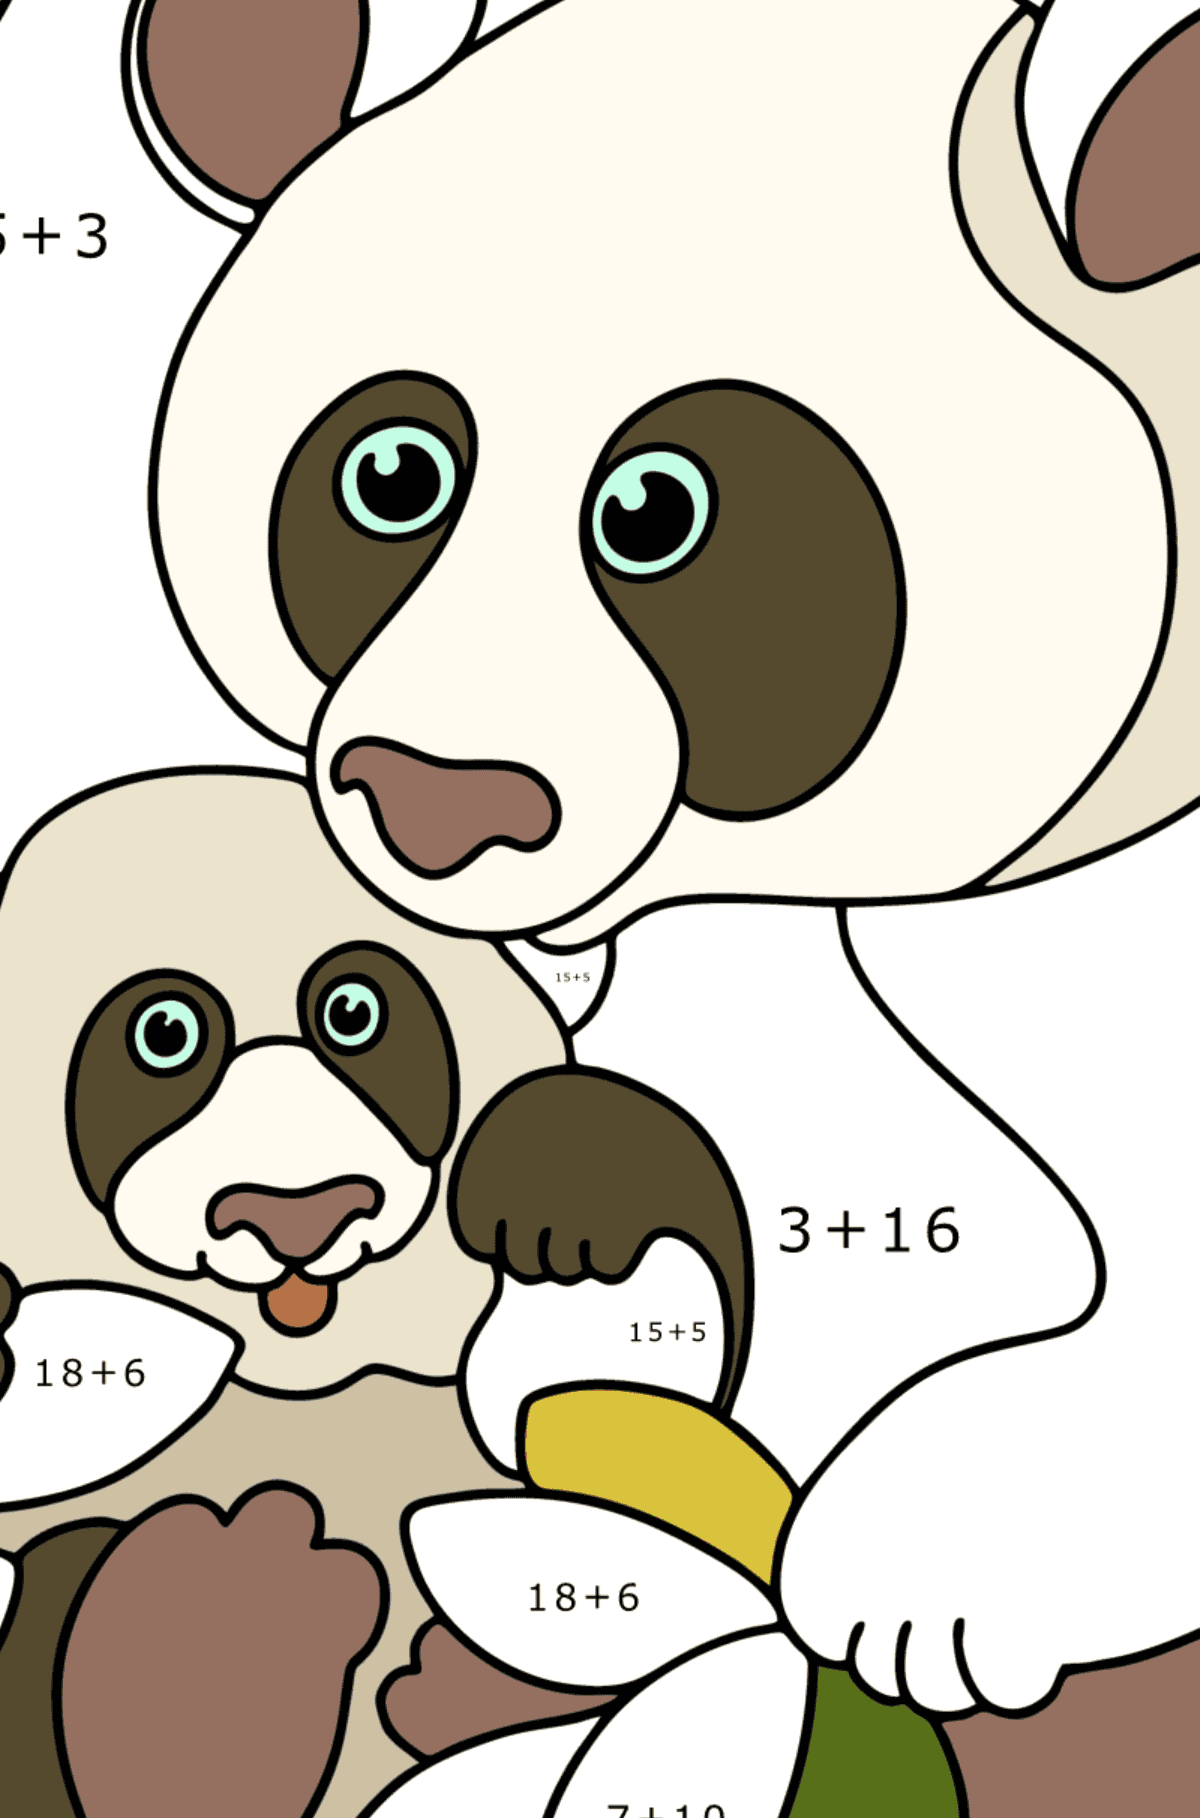 Giant panda with a cub coloring page - Math Coloring - Addition for Kids